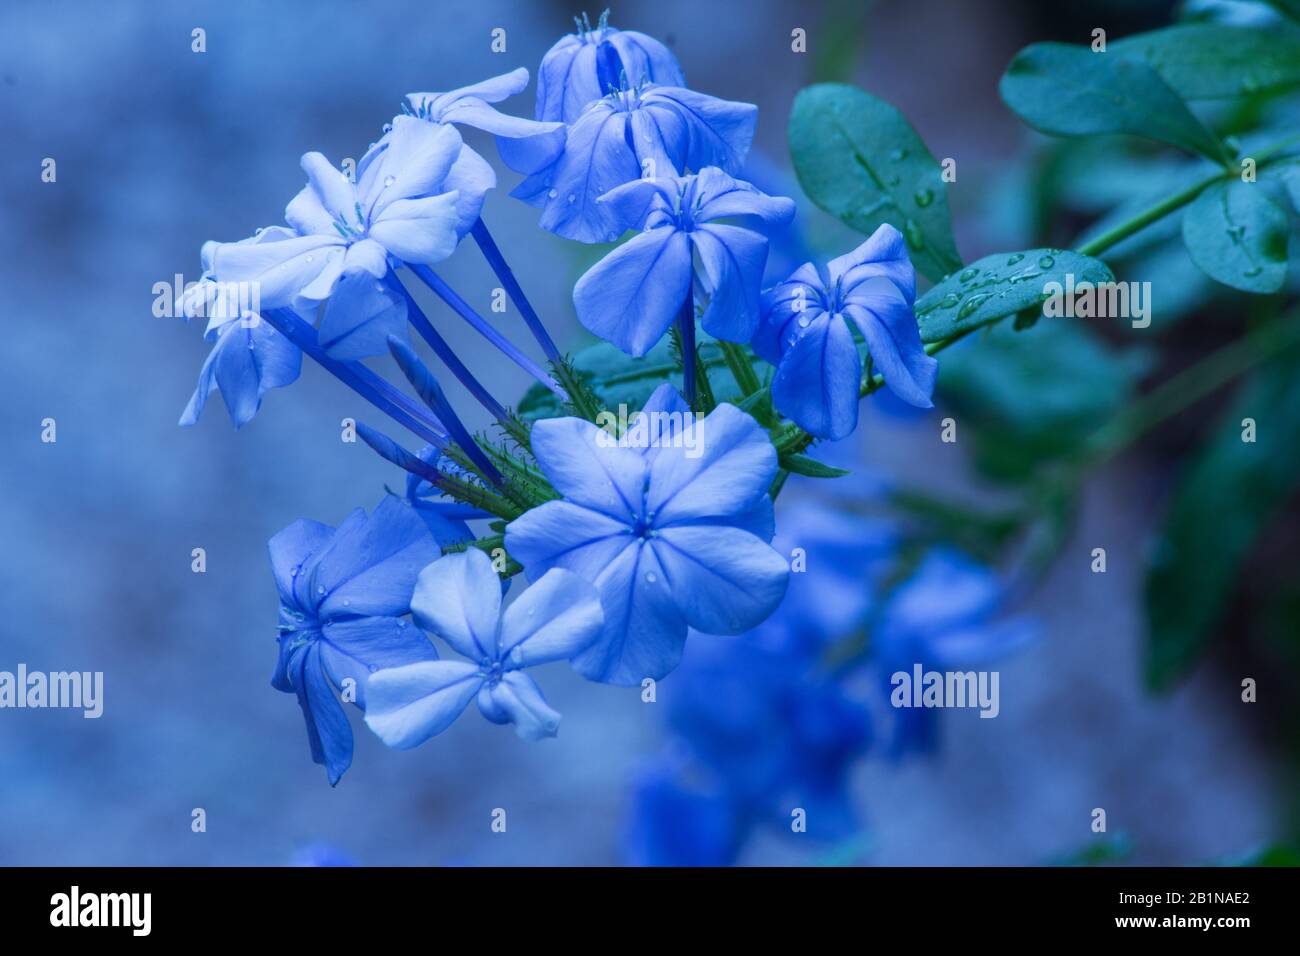 Plumbago plant and flower Stock Photo